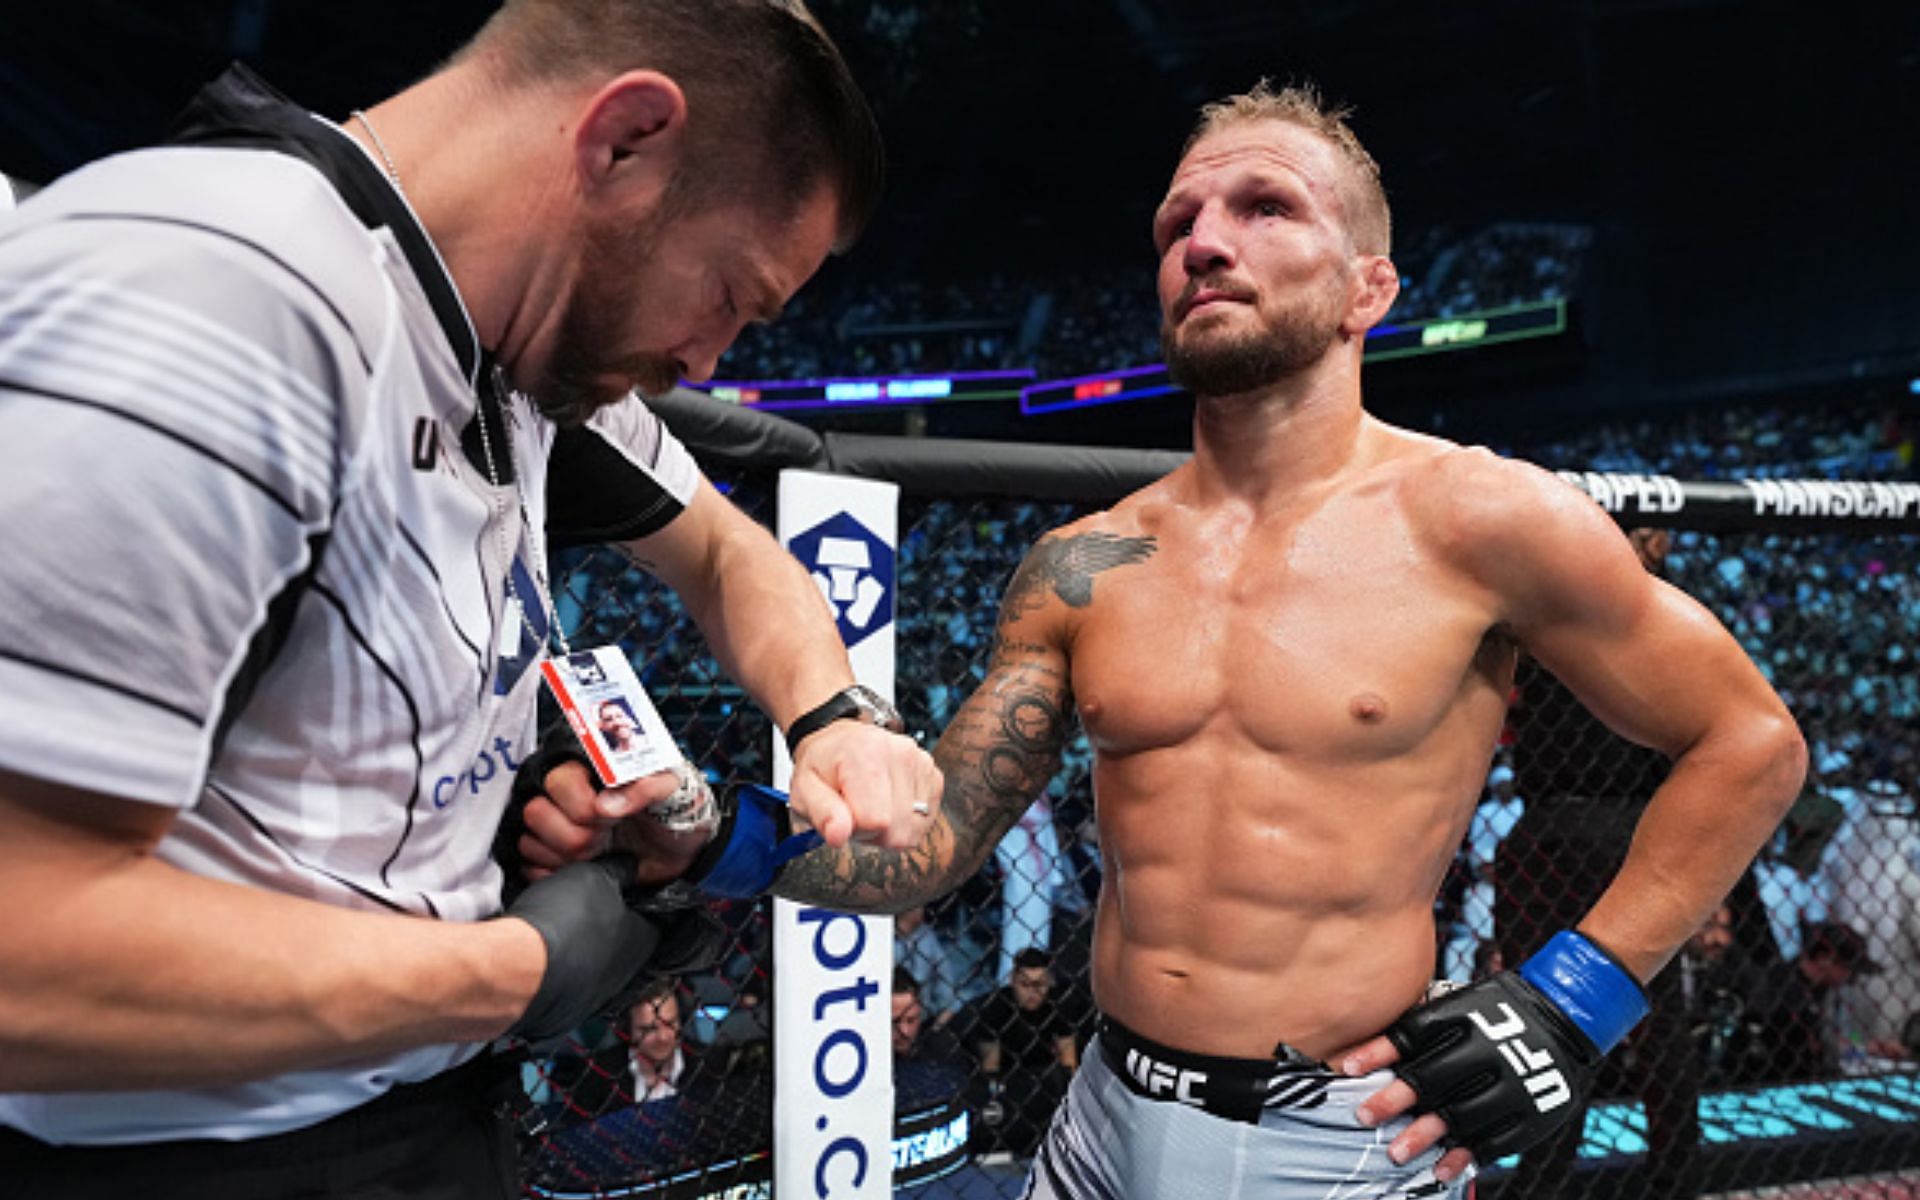 T.J. Dillashaw getting gloves taken off after UFC 280 loss (Image via Getty)